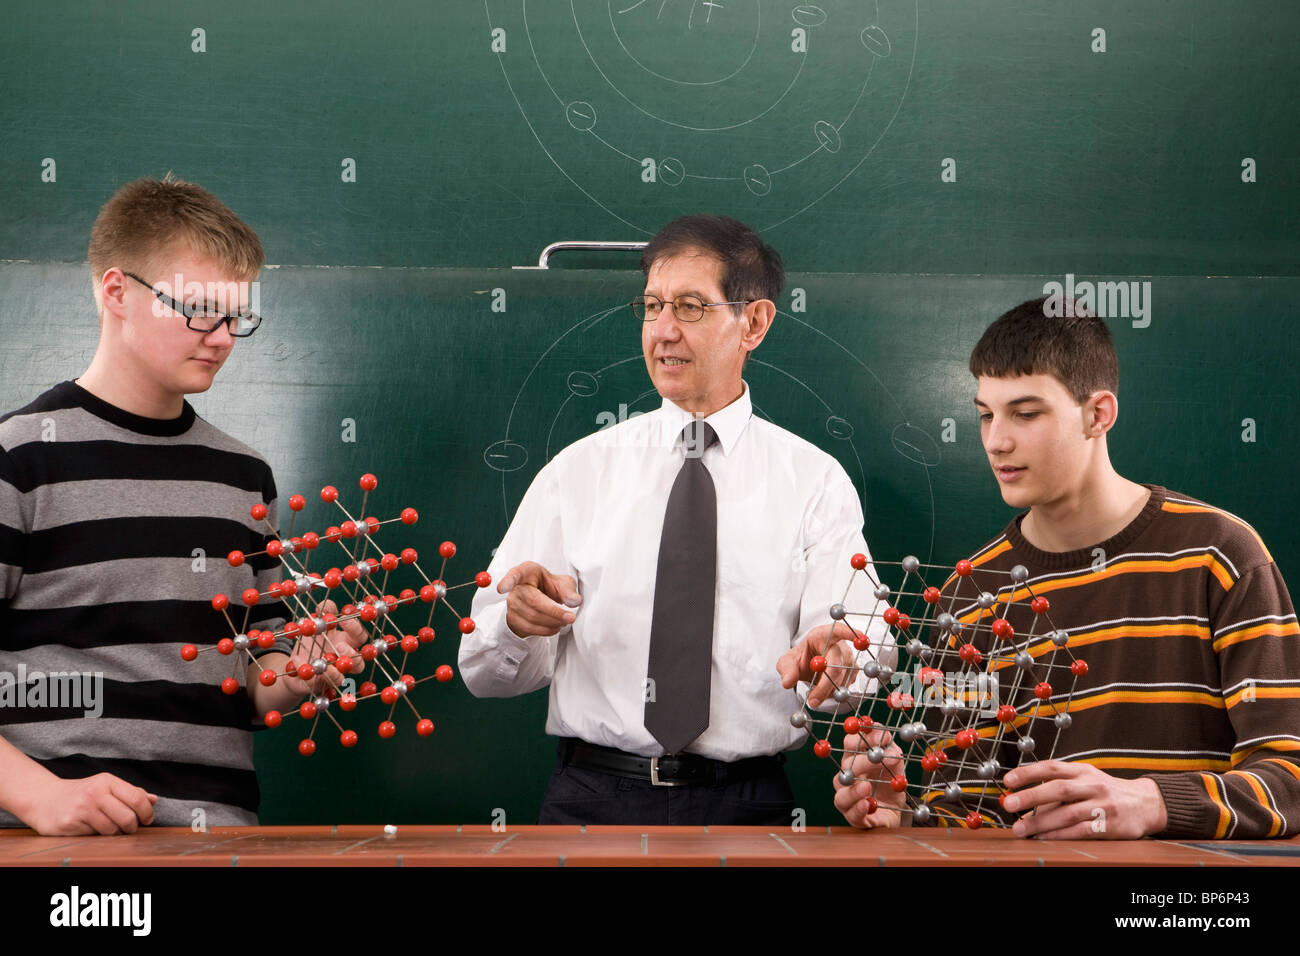 A teacher showing students molecular structure models Stock Photo